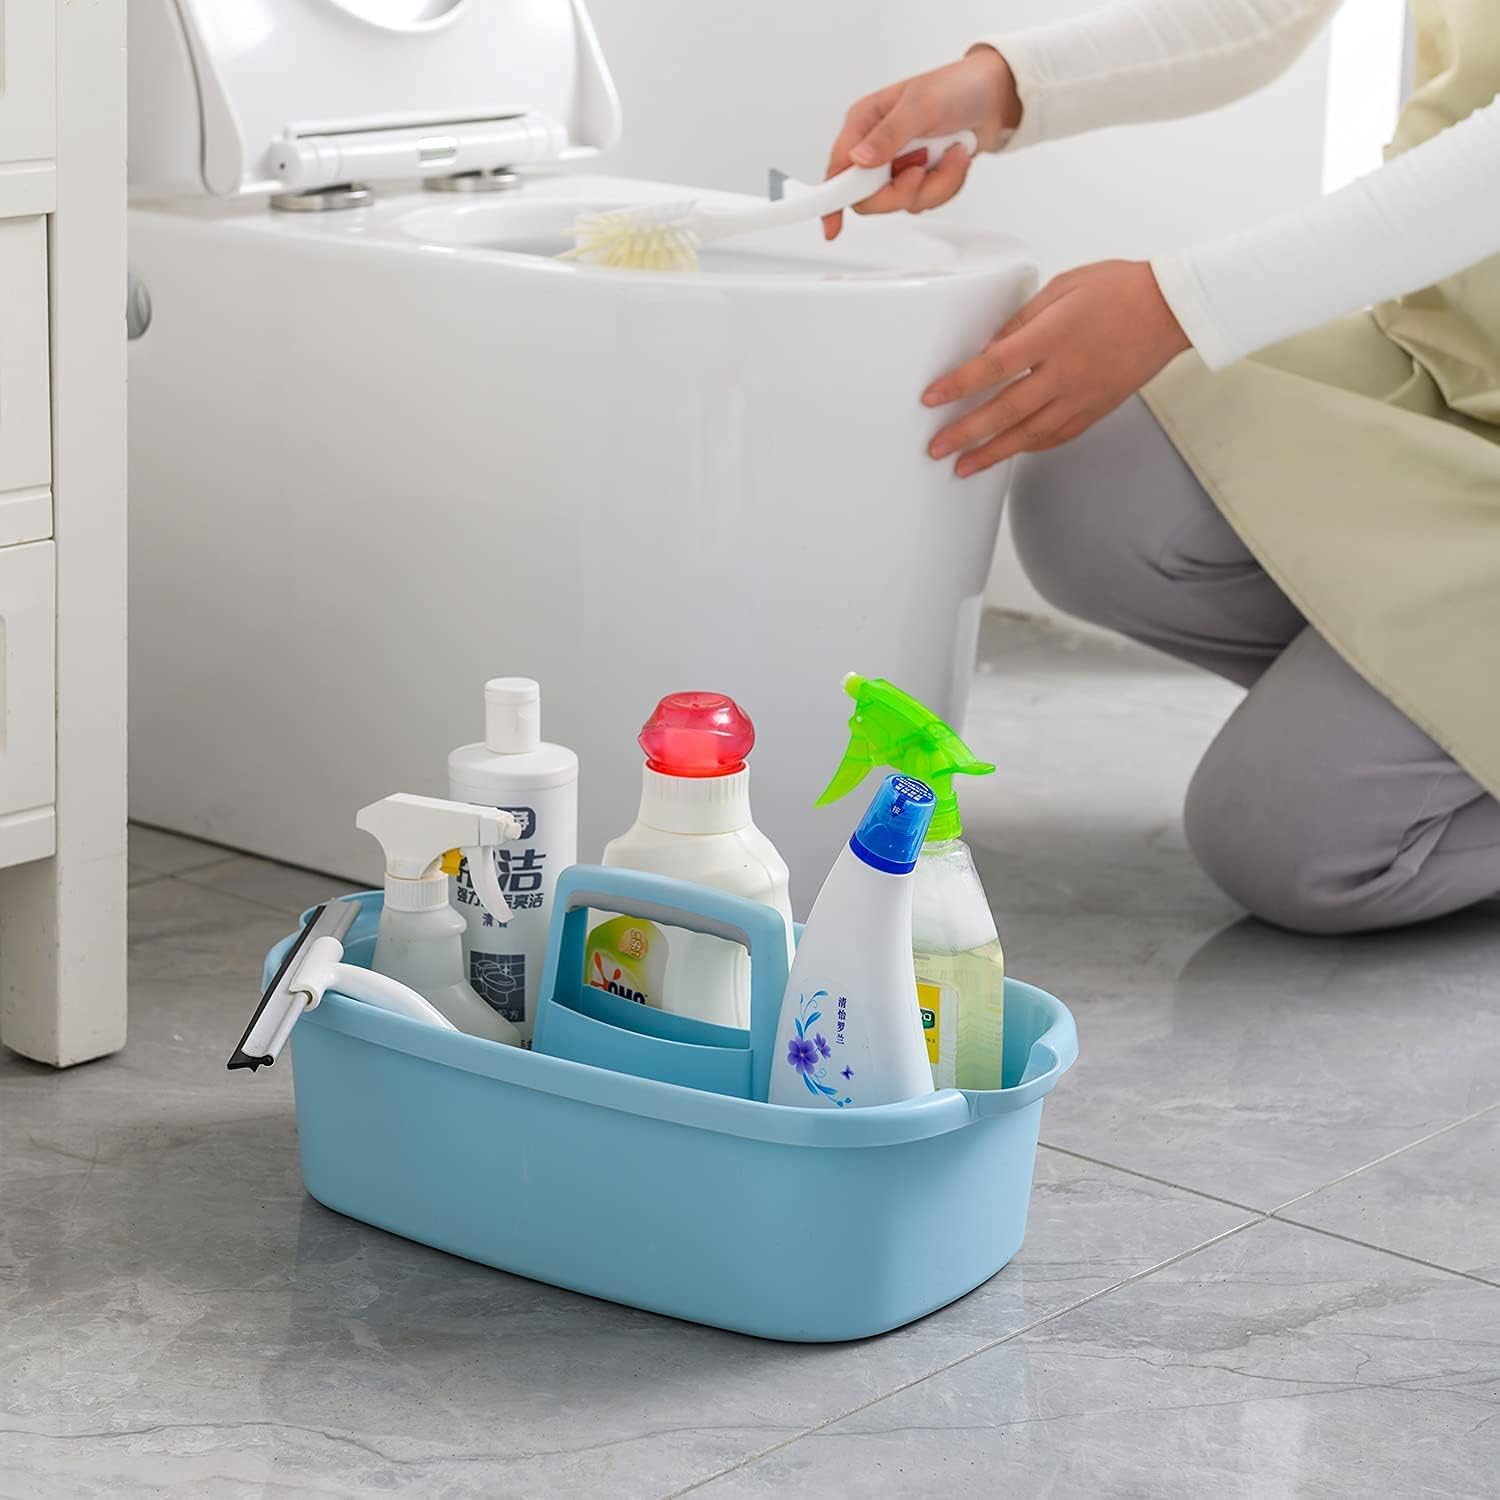 ALINK Cleaning Caddy with Handle, Large Plastic Shower Caddy Basket Organizer 1915